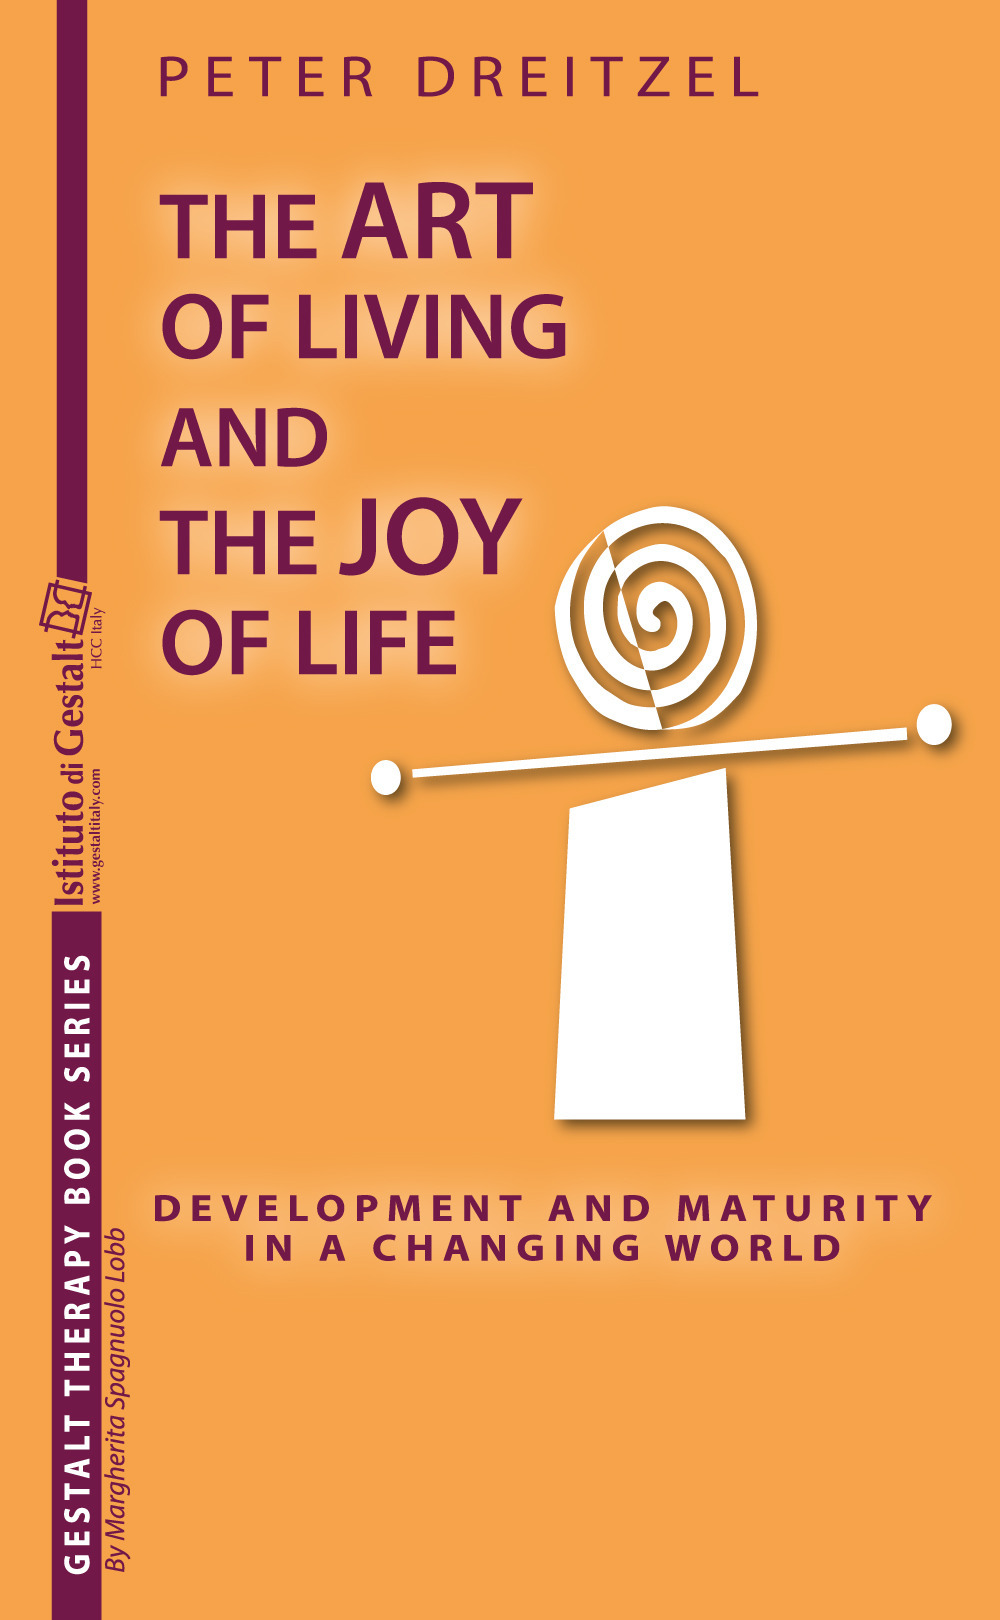 The art of living and the joy of life. Developing and maturity in a changing world